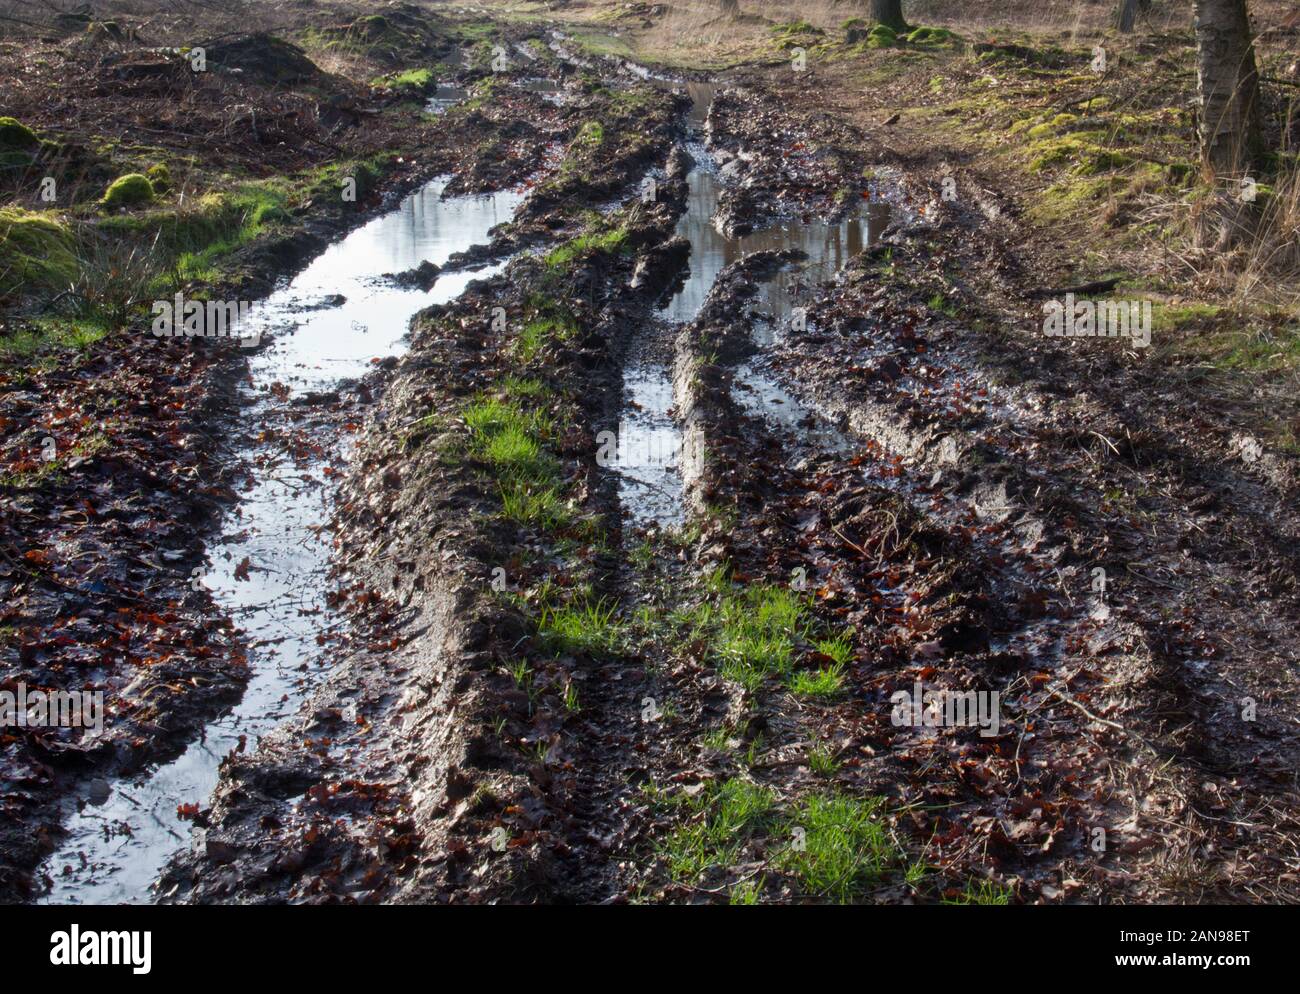 Bad road conditions: tire tracks in a very muddy path with puddles Stock Photo